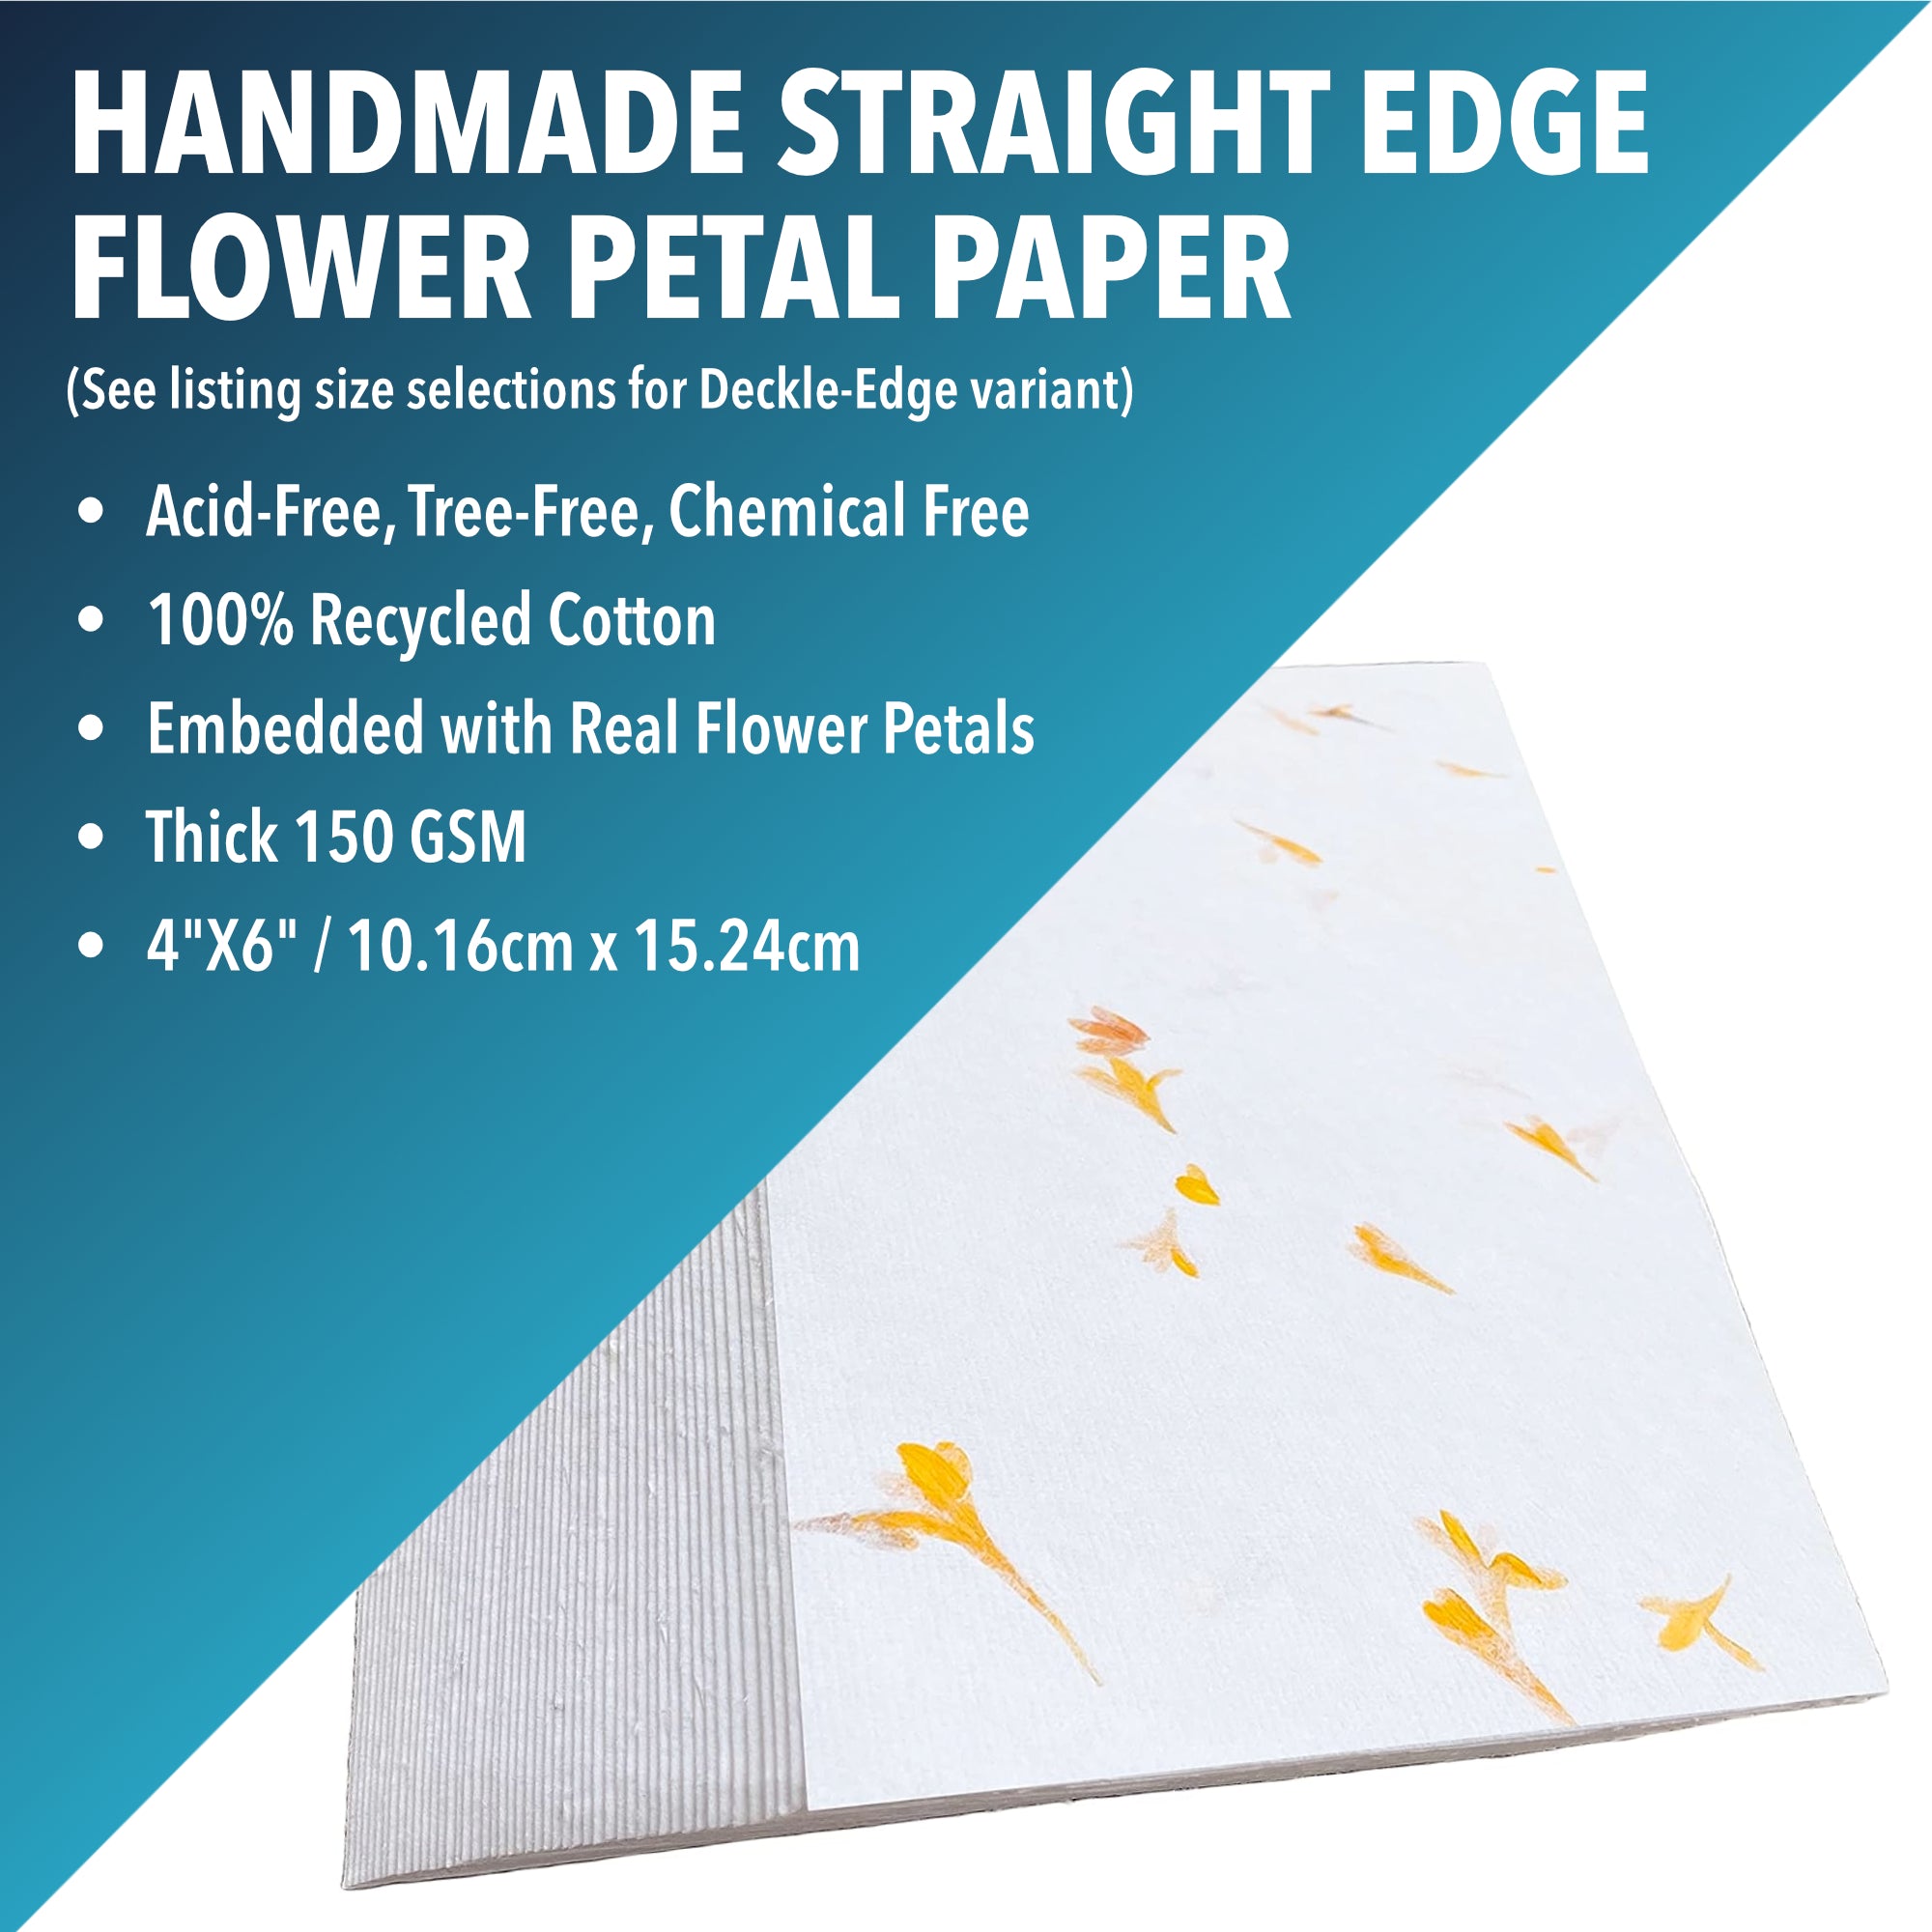 Handmade White Paper with Real Flower Petals and Deckle Edge – Wanderings